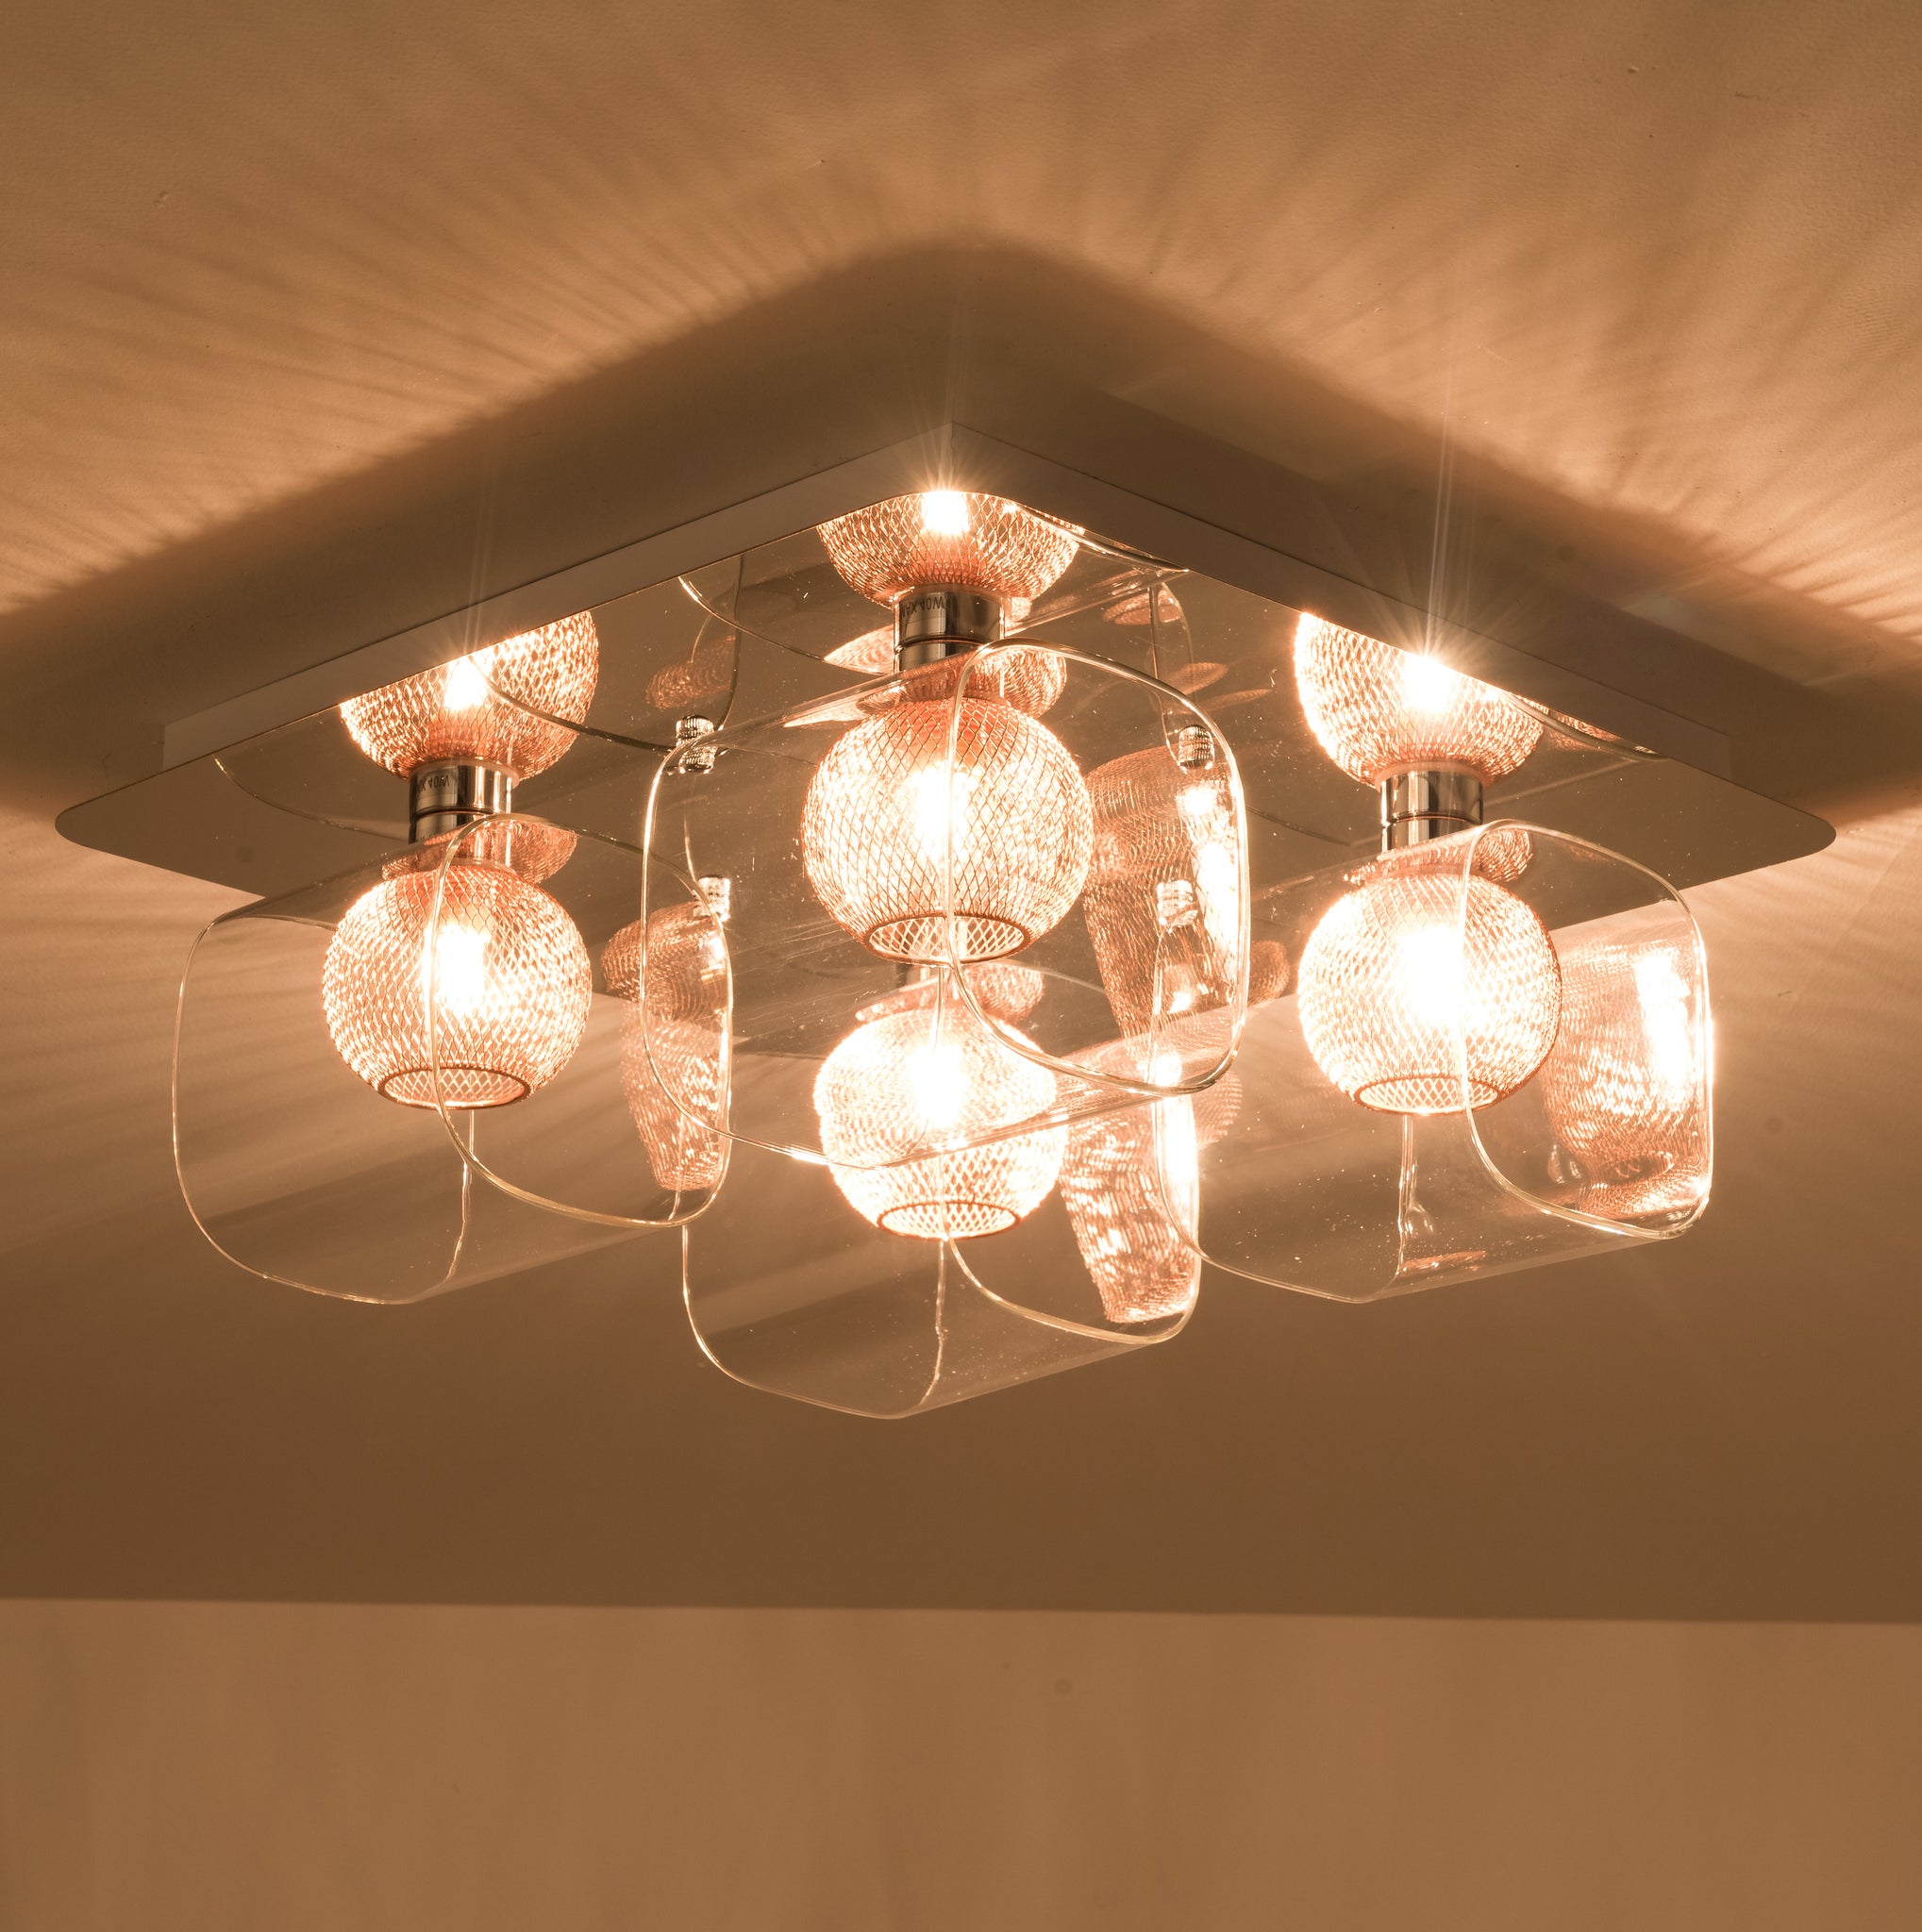 Polished Chrome Ceiling Light, Decorative Inner mesh in Copper with glass Shades